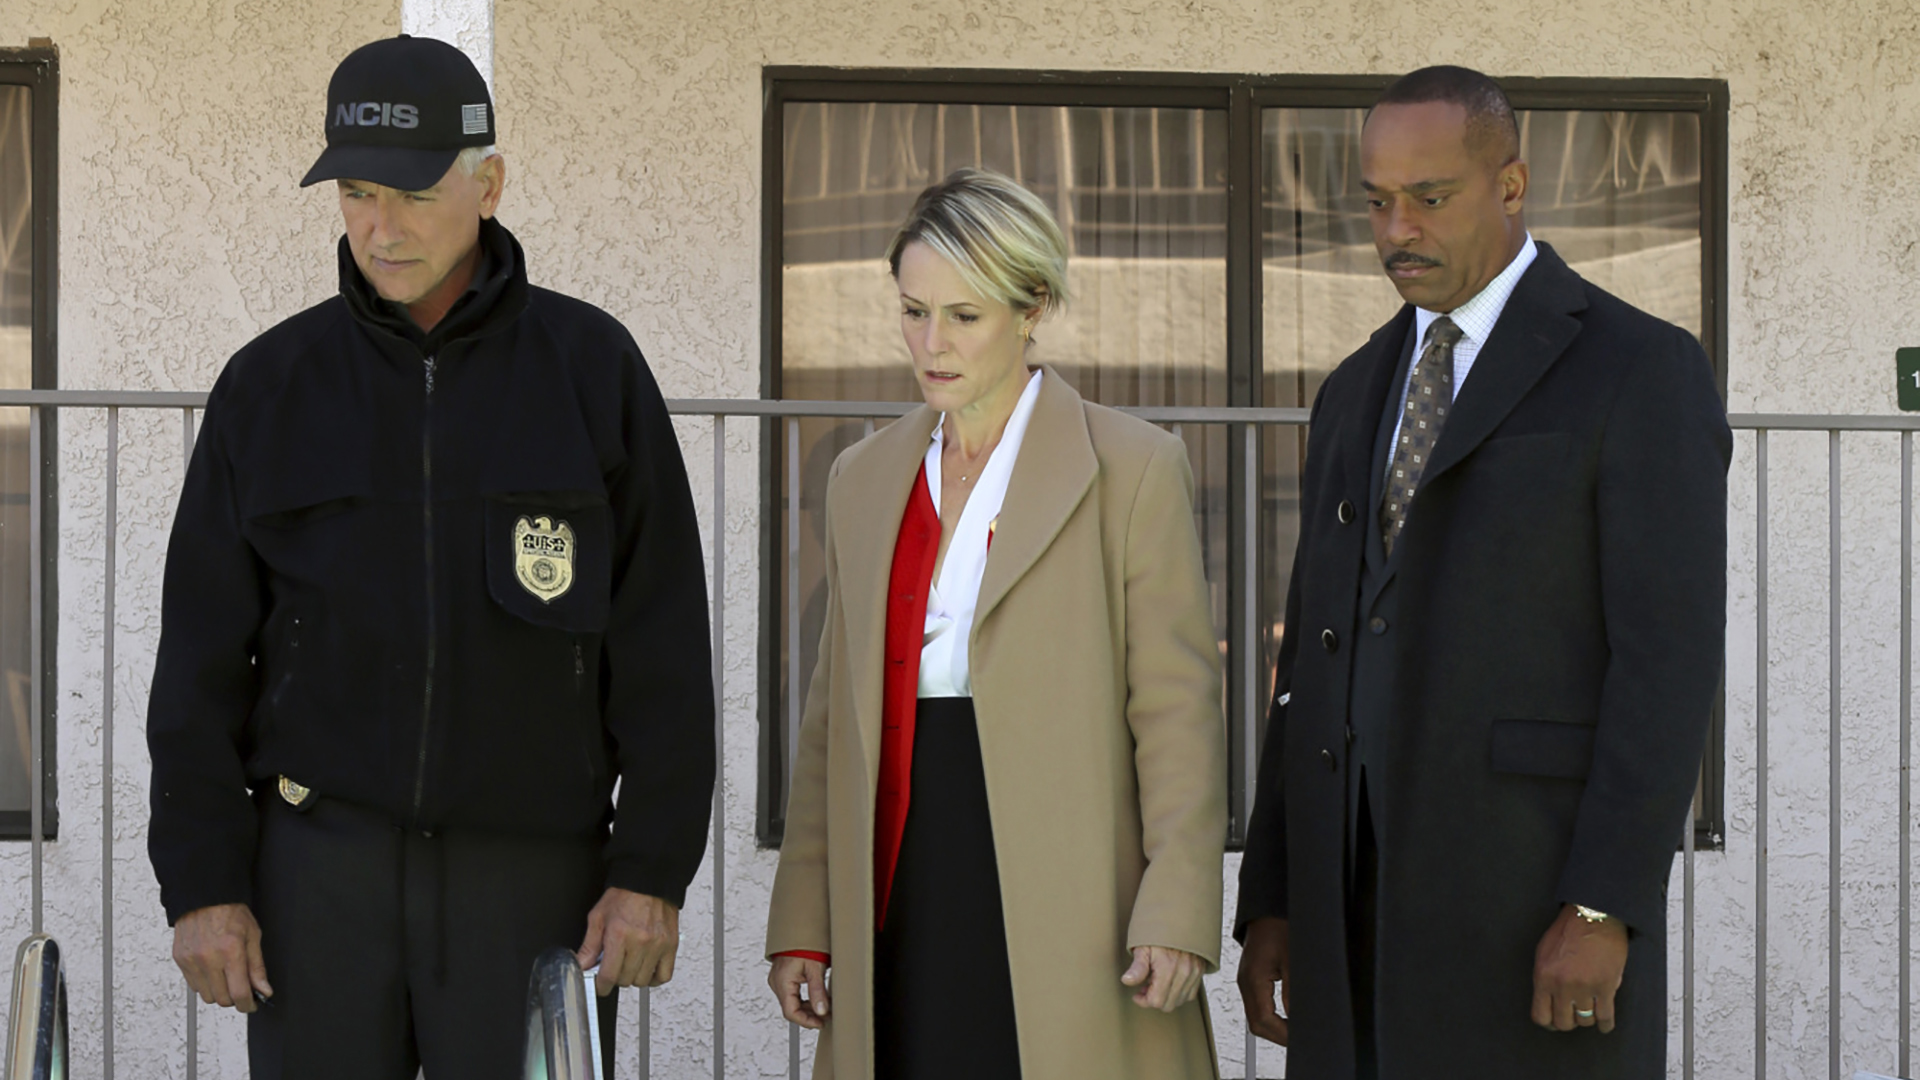 Gibbs, the Congresswoman, and Vance take in the crime scene.